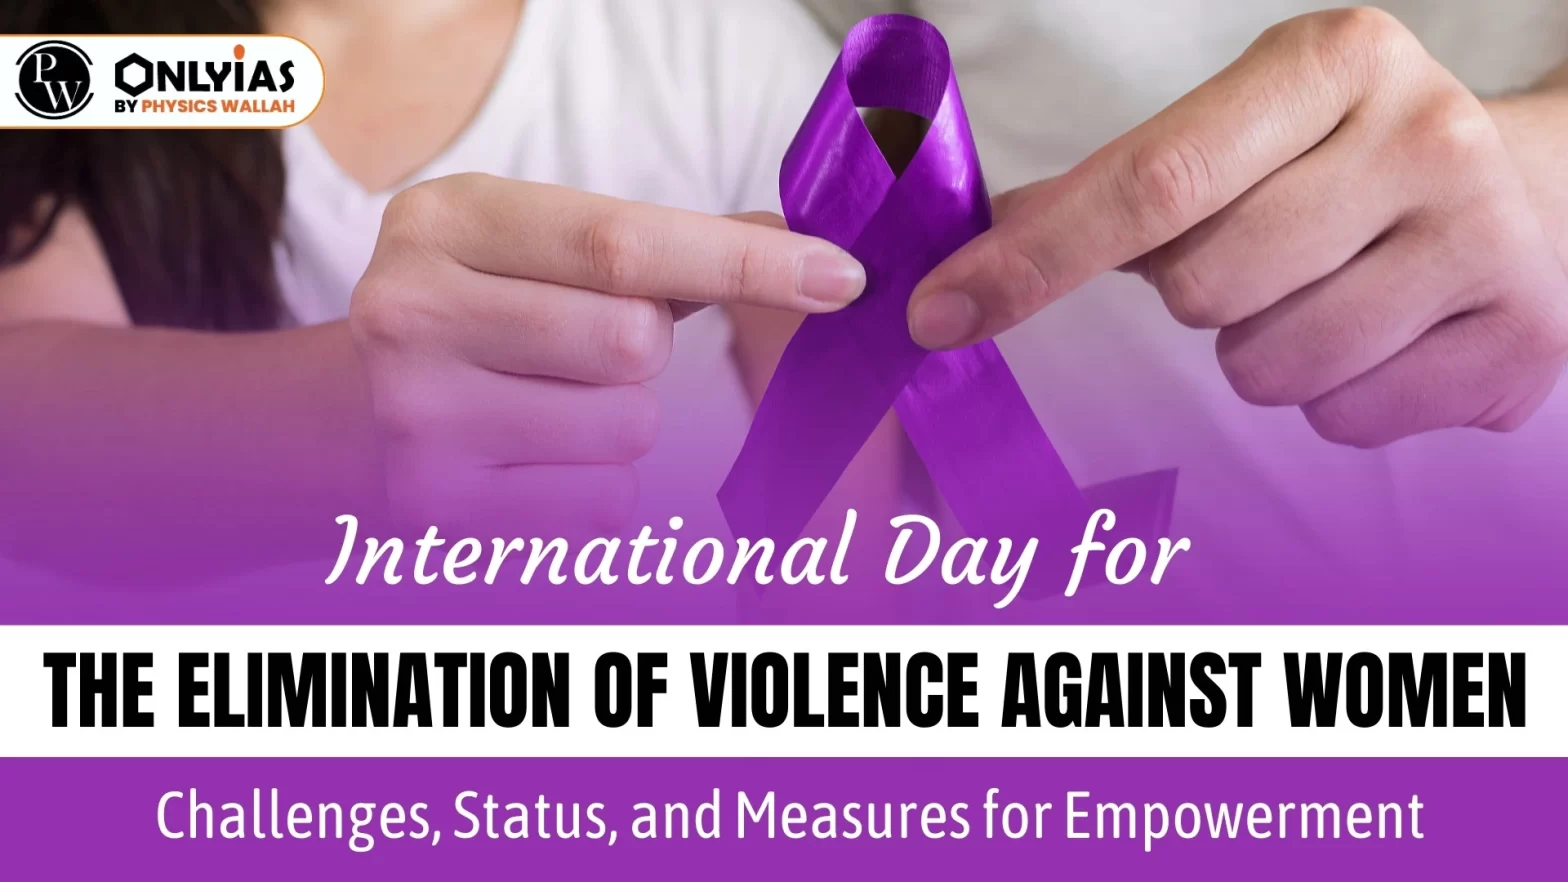 International Day for the Elimination of Violence Against Women: Challenges, Status, and Measures for Empowerment